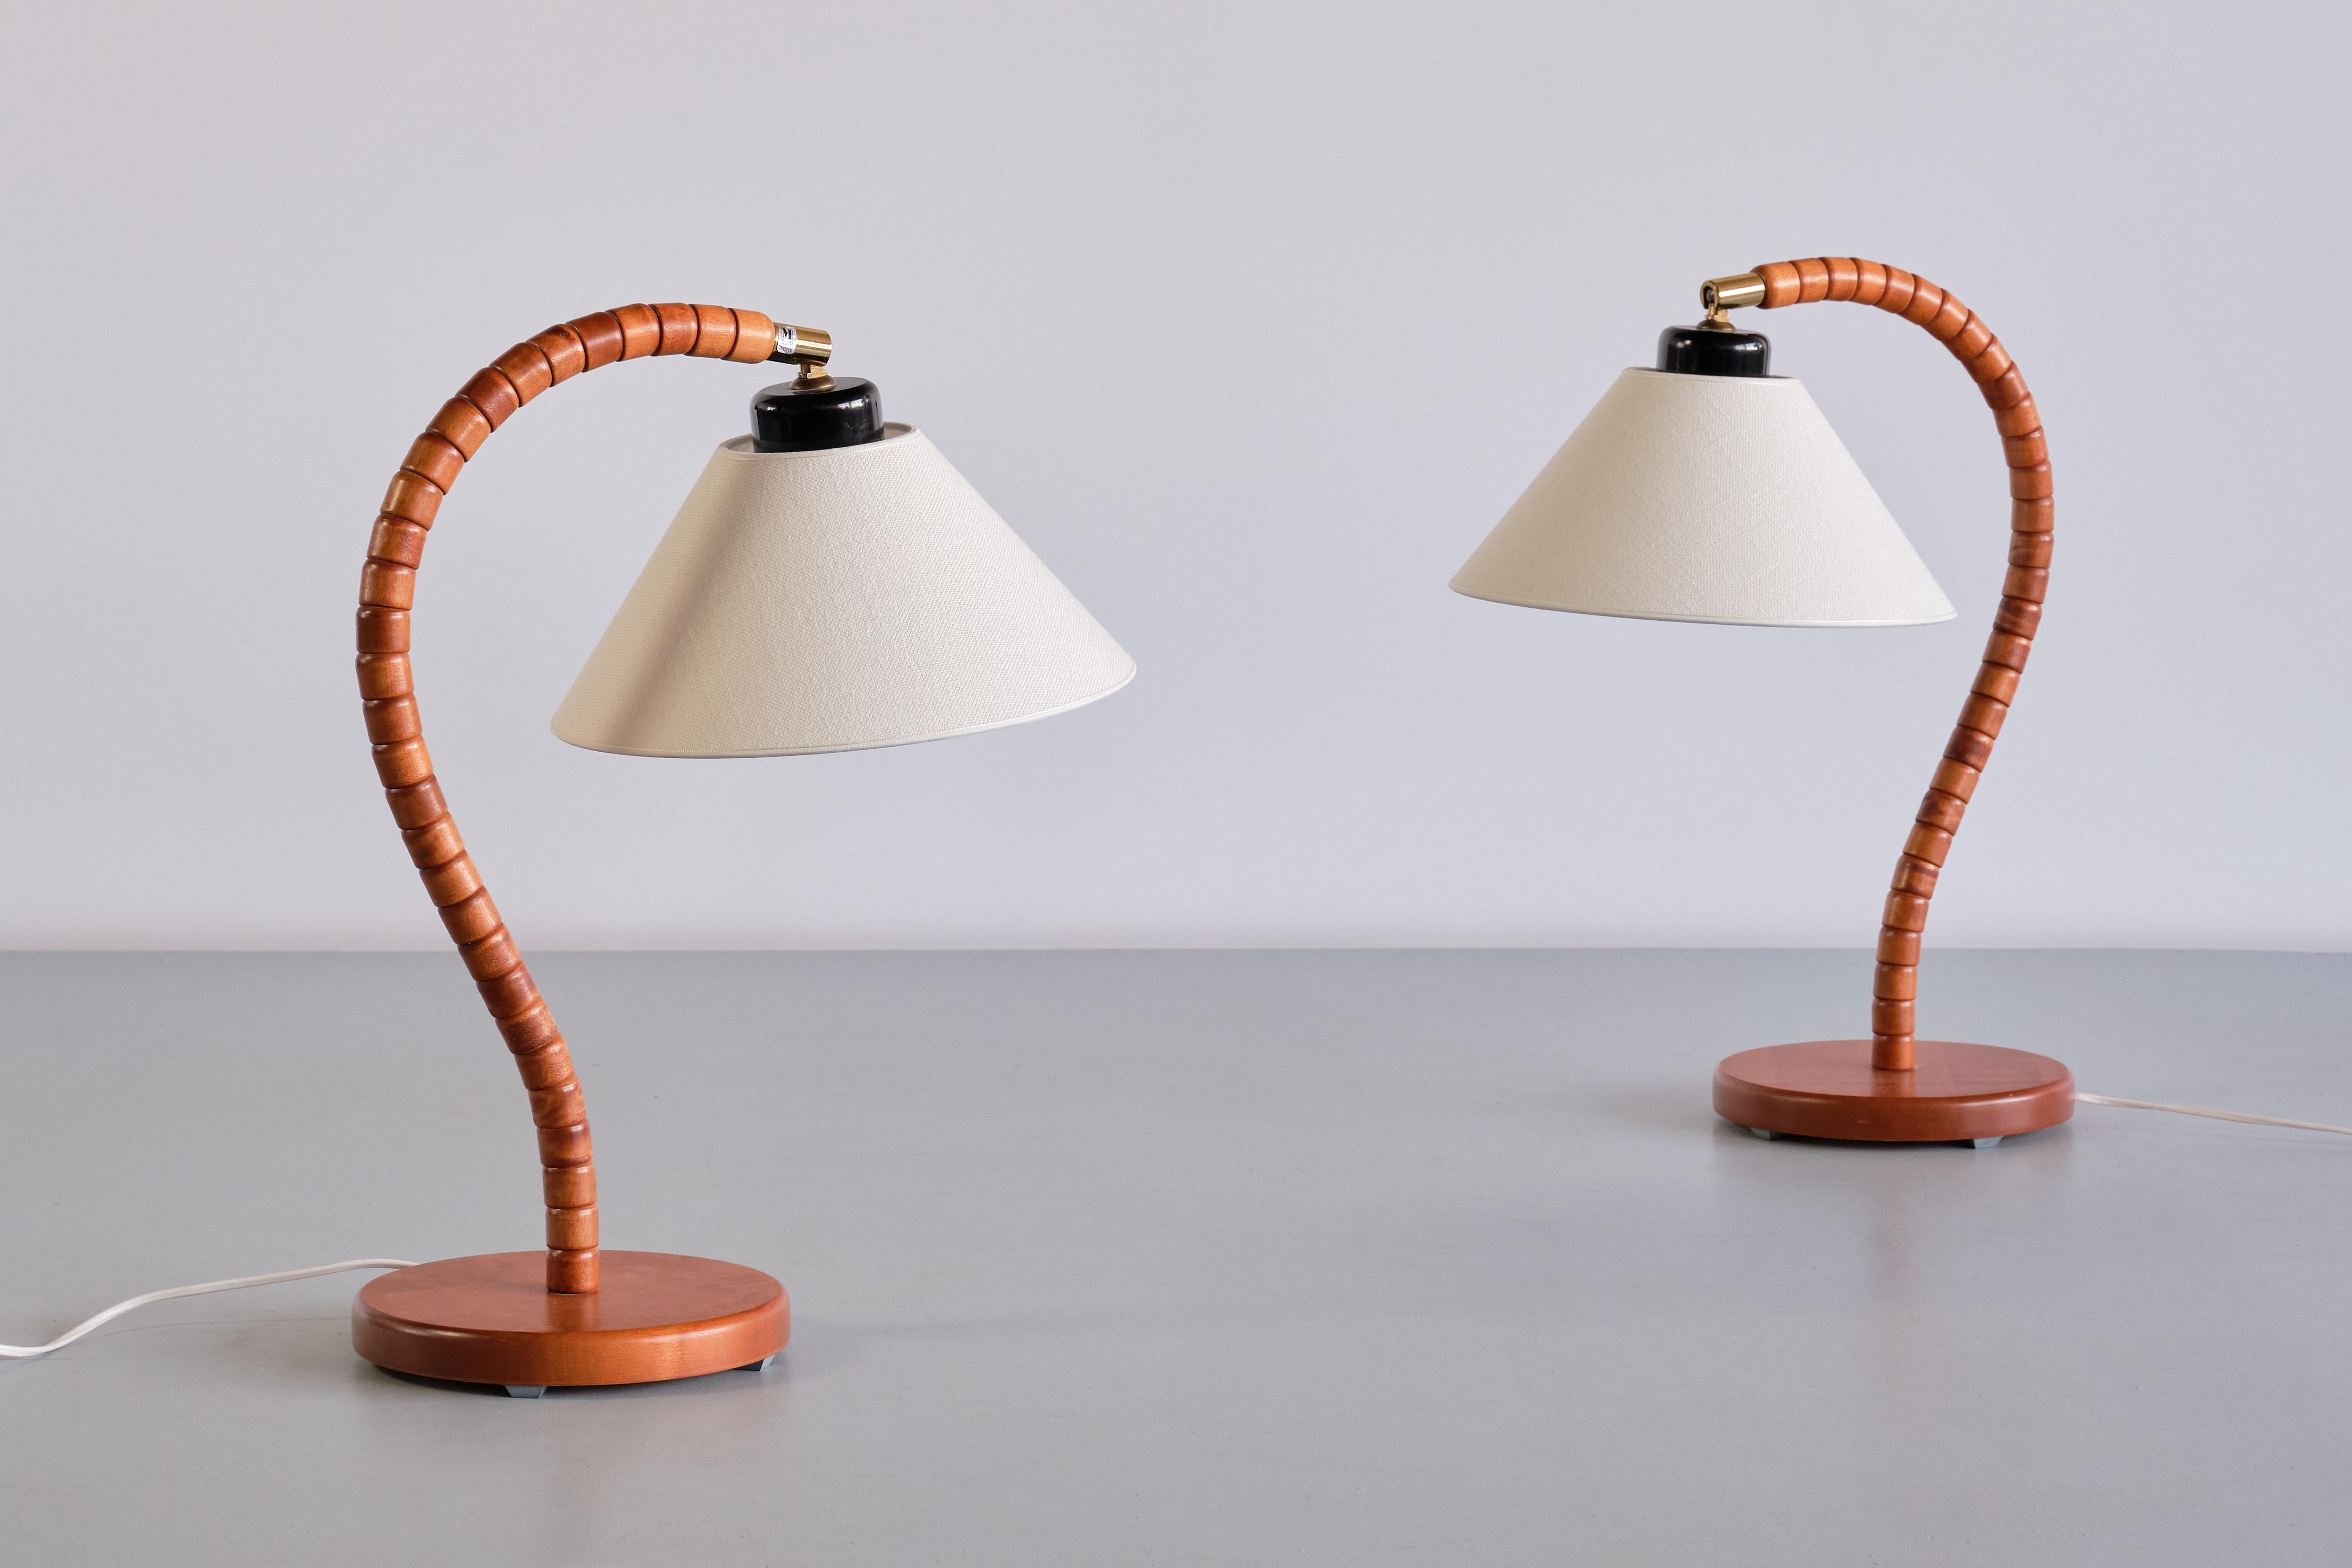 This striking pair of table lamps was produced by Markslöjd in Kinna, Sweden in the 1960s. The design is marked by the sculptural, organic shaped frame resting on a circular base. The base is made of solid stained beech wood. Brass and bakelite